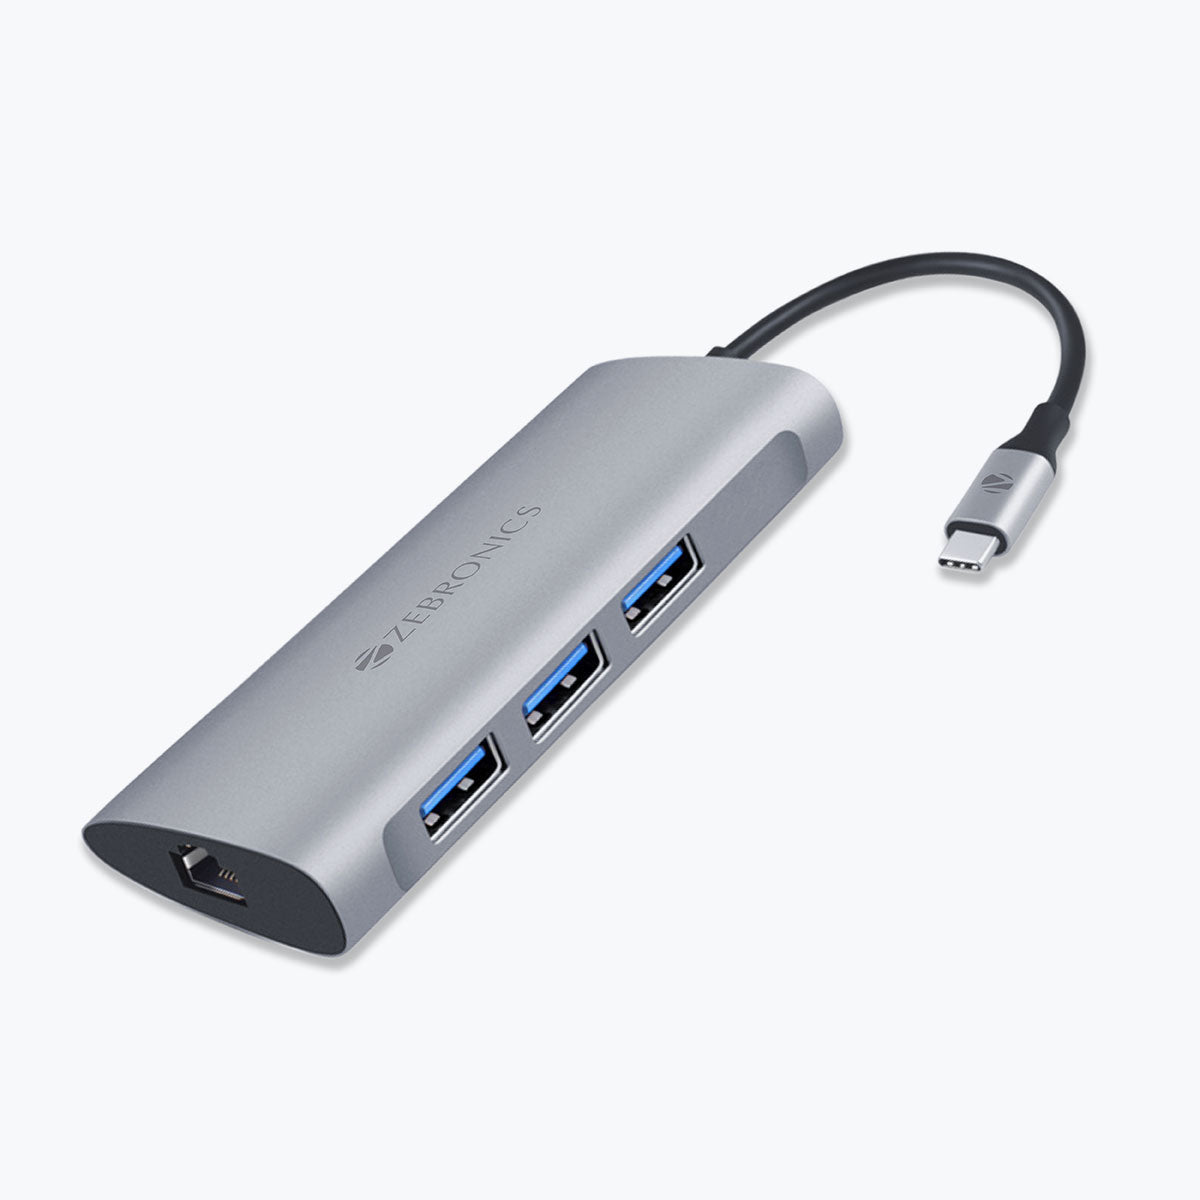 Zeb-TA1000UCL – 6 in 1 USB Type C Multiport Adapter with USB, SD, Micro SD, RJ45 Slots - Zebronics